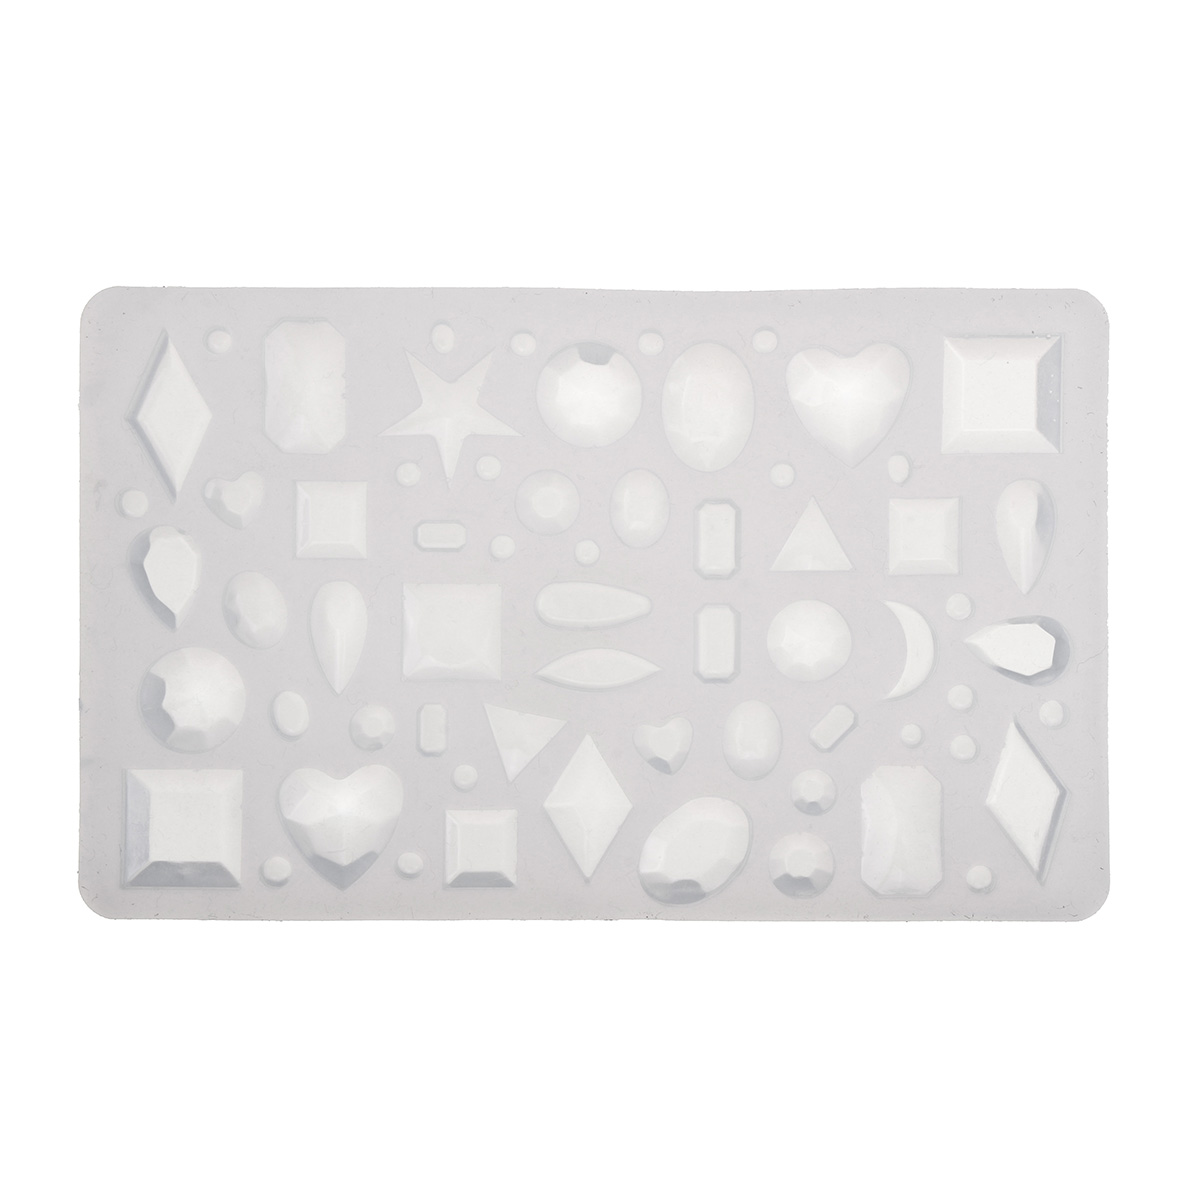 98Pcs-DIY-Silicone-Pendant-Mold-Jewelry-Making-Cube-Resin-Casting-Molds-Craft-Tools-Kit-1517942-9